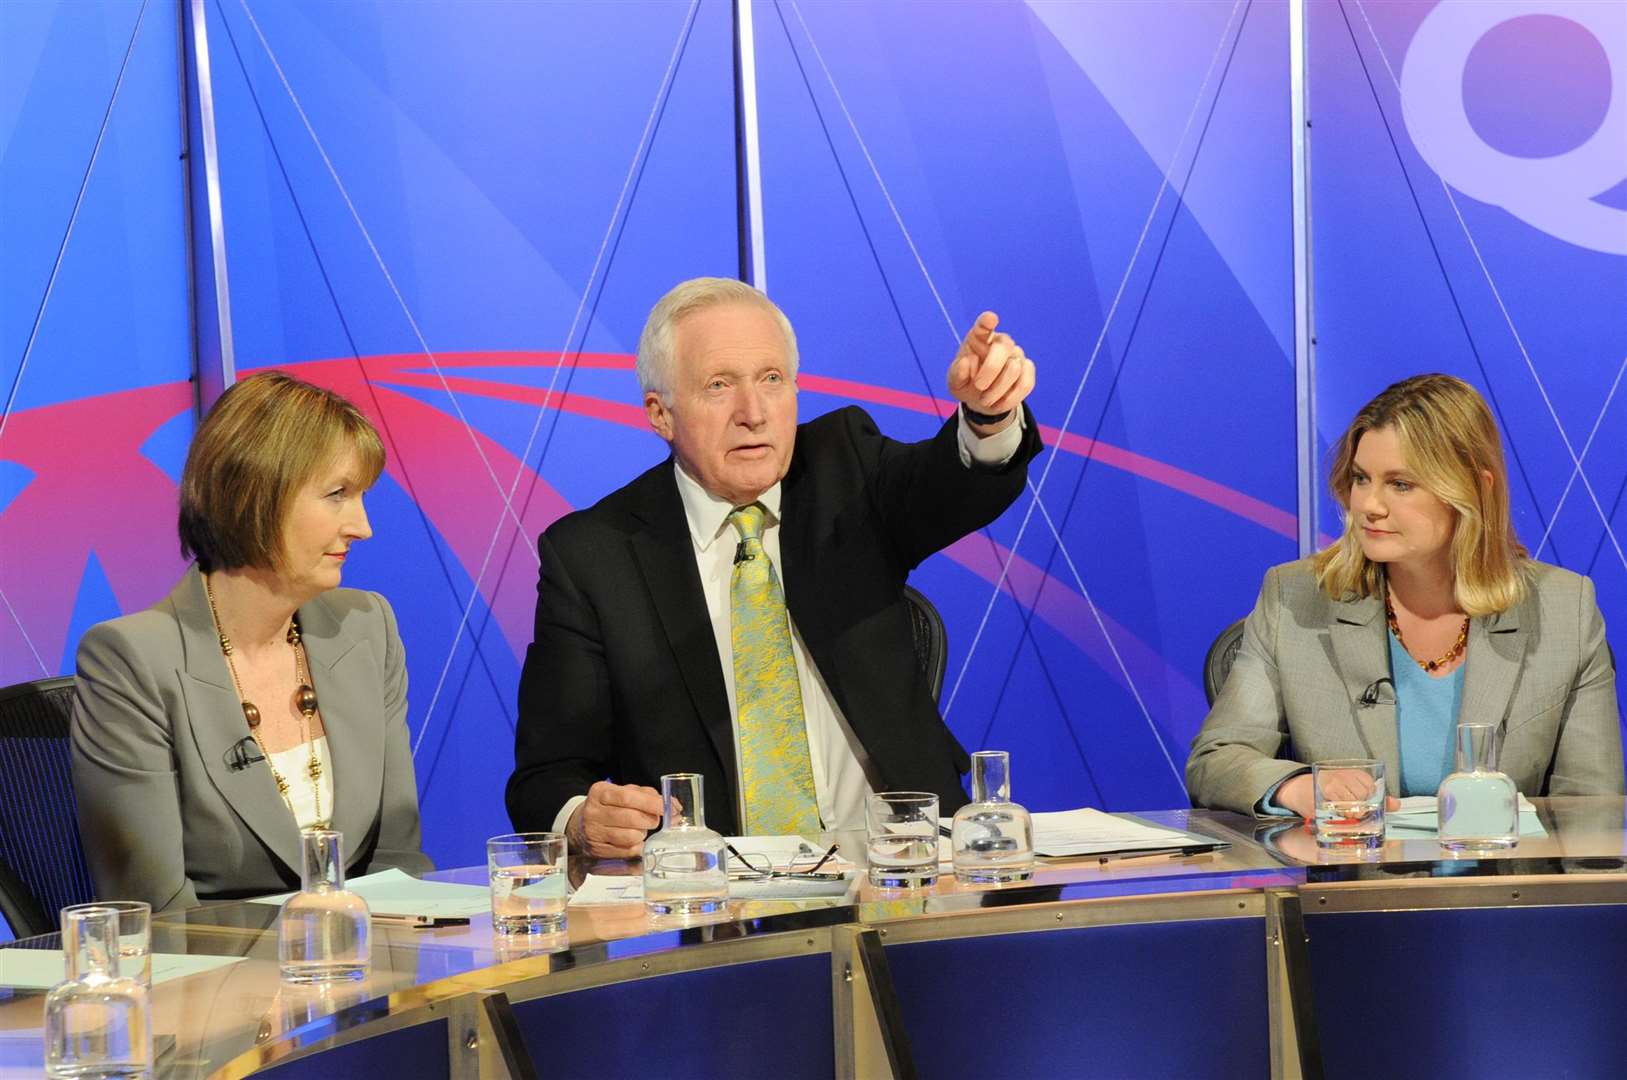 Mick Jagger Centre, Shepherds Lane, Dartford. BBC's Question Time programme broadcast from the Mick Jagger Centre. L/R, Harriet Harman, David Dimbleby, Justine Greening MP. Picture: Simon Hildrew FM2576221 (2910336)